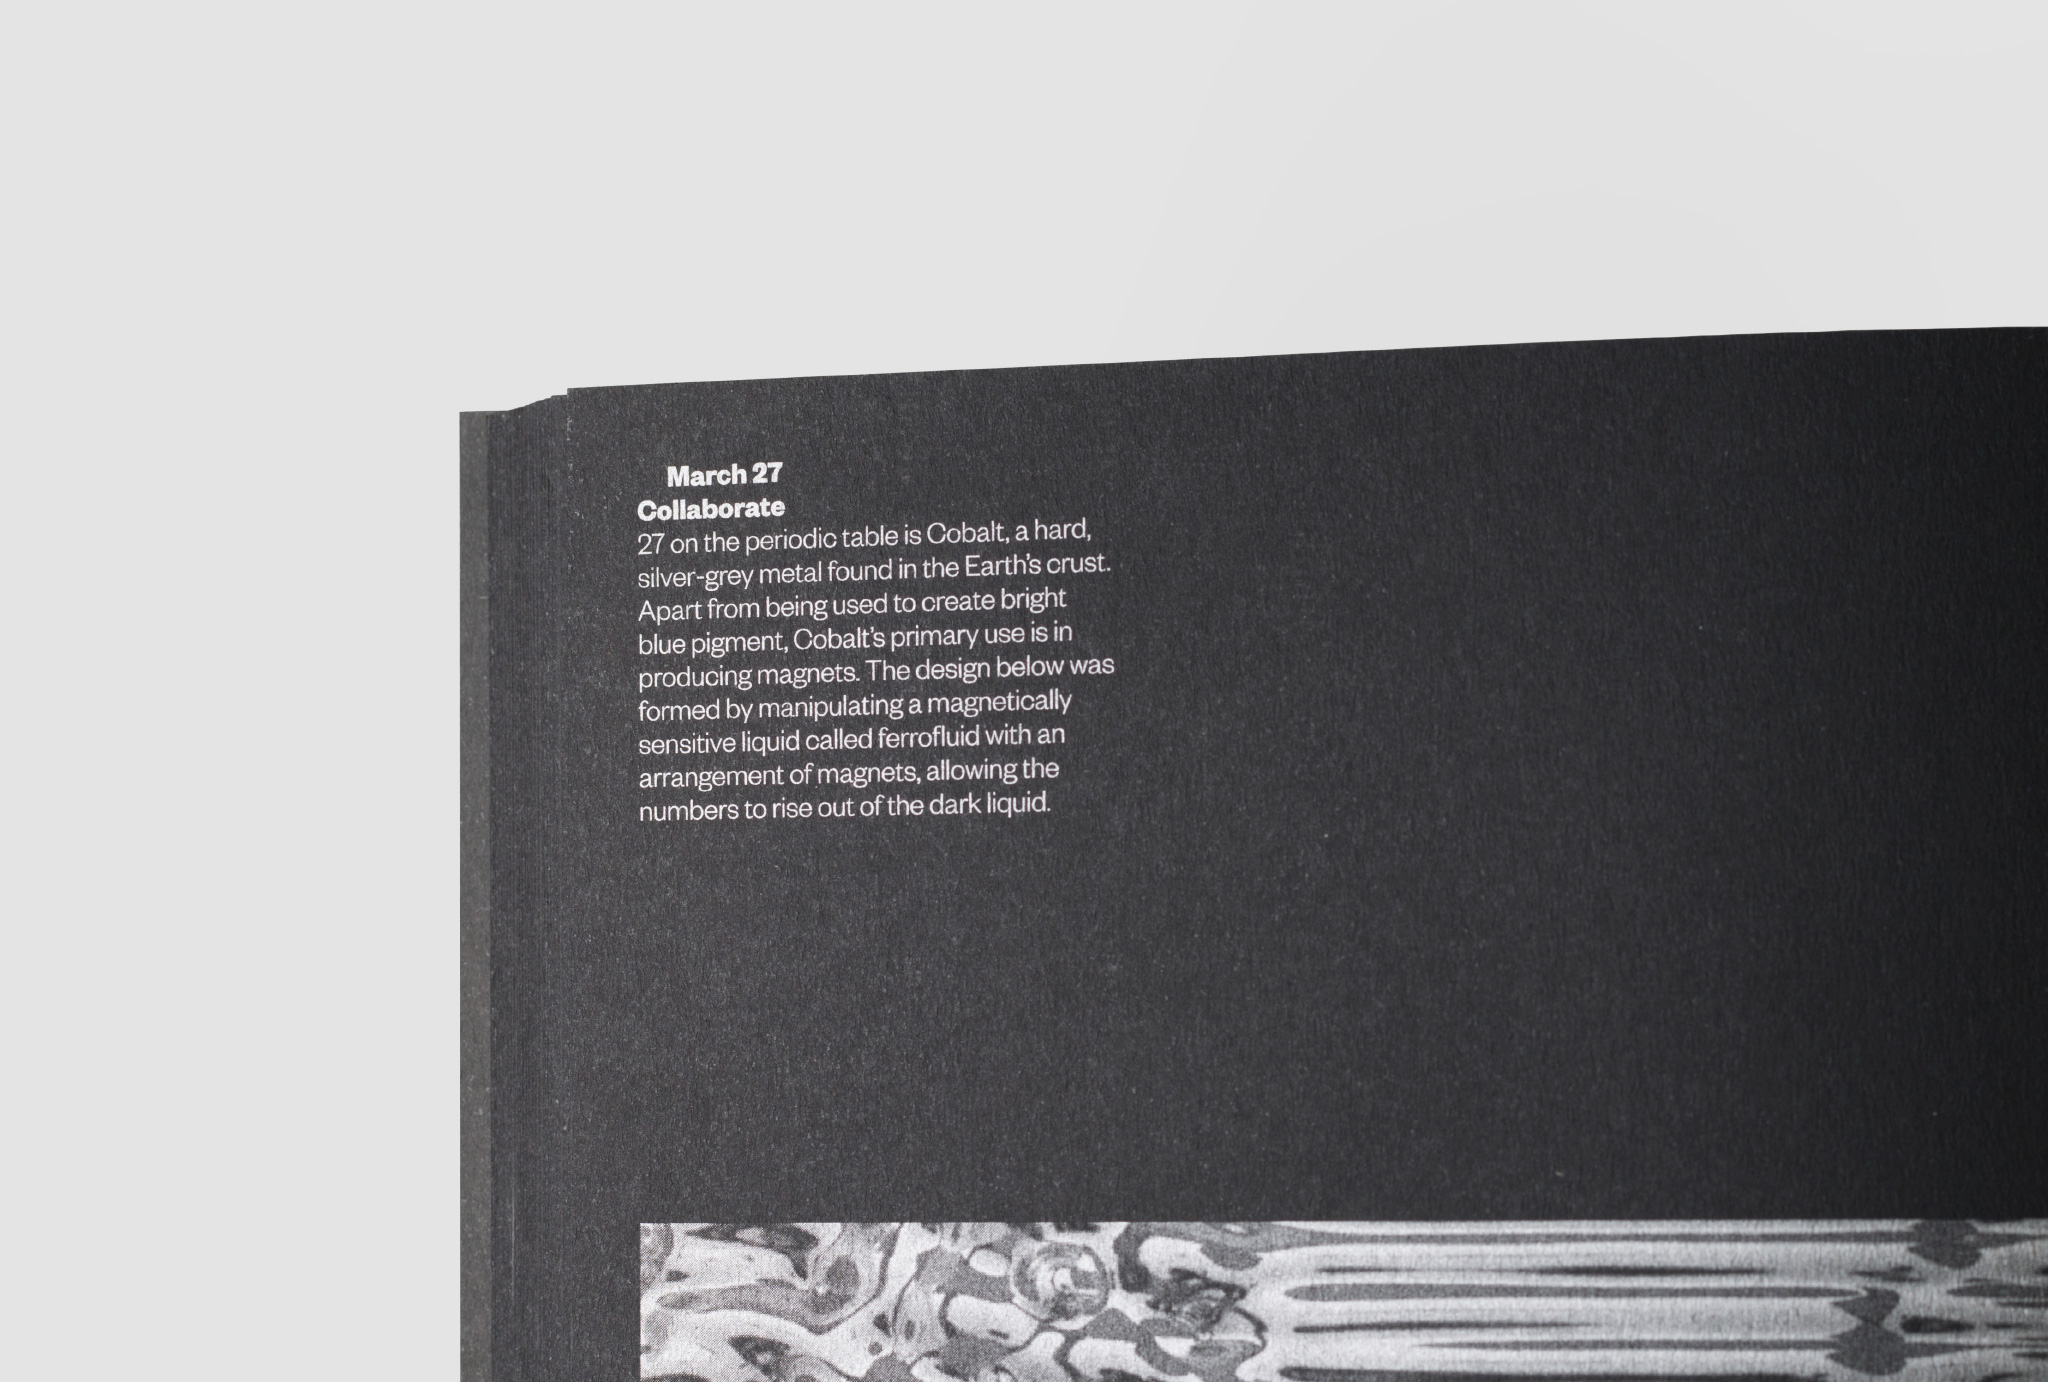 close up of a silver written text of ‘March 27, Collaborate’ in a black book